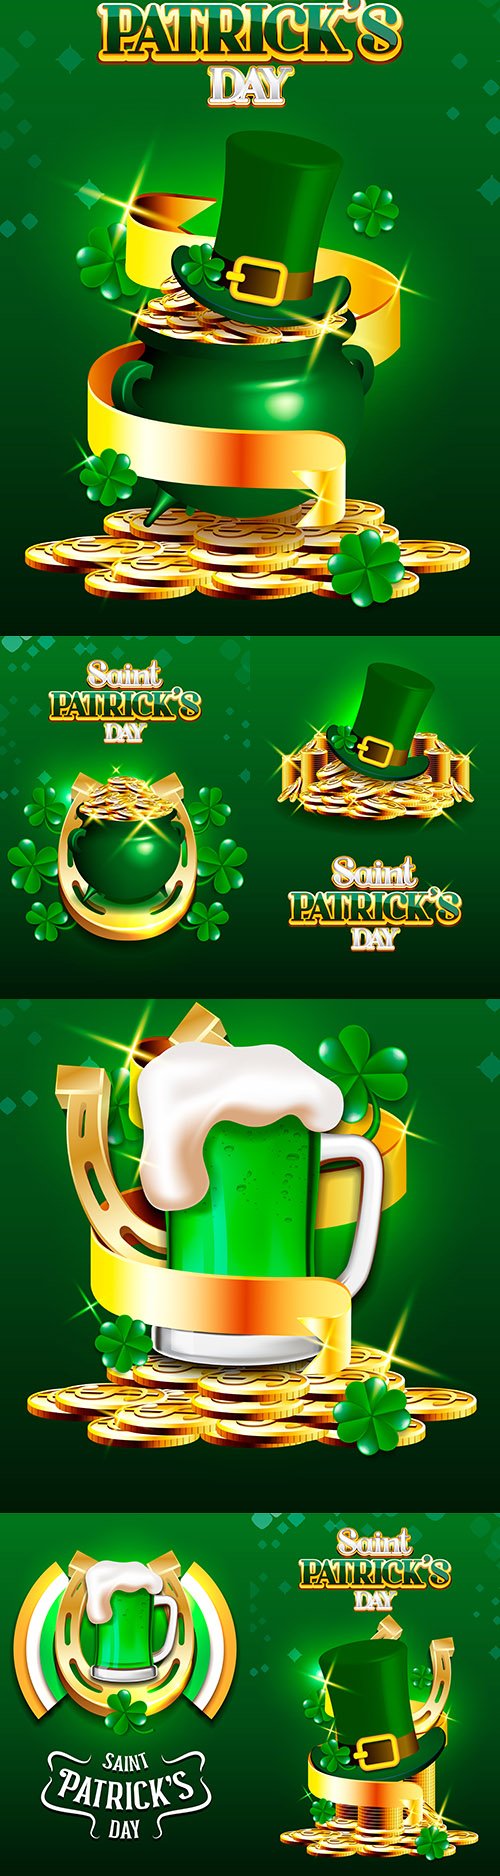 St. Patrick's Day party design vector illustrations 9